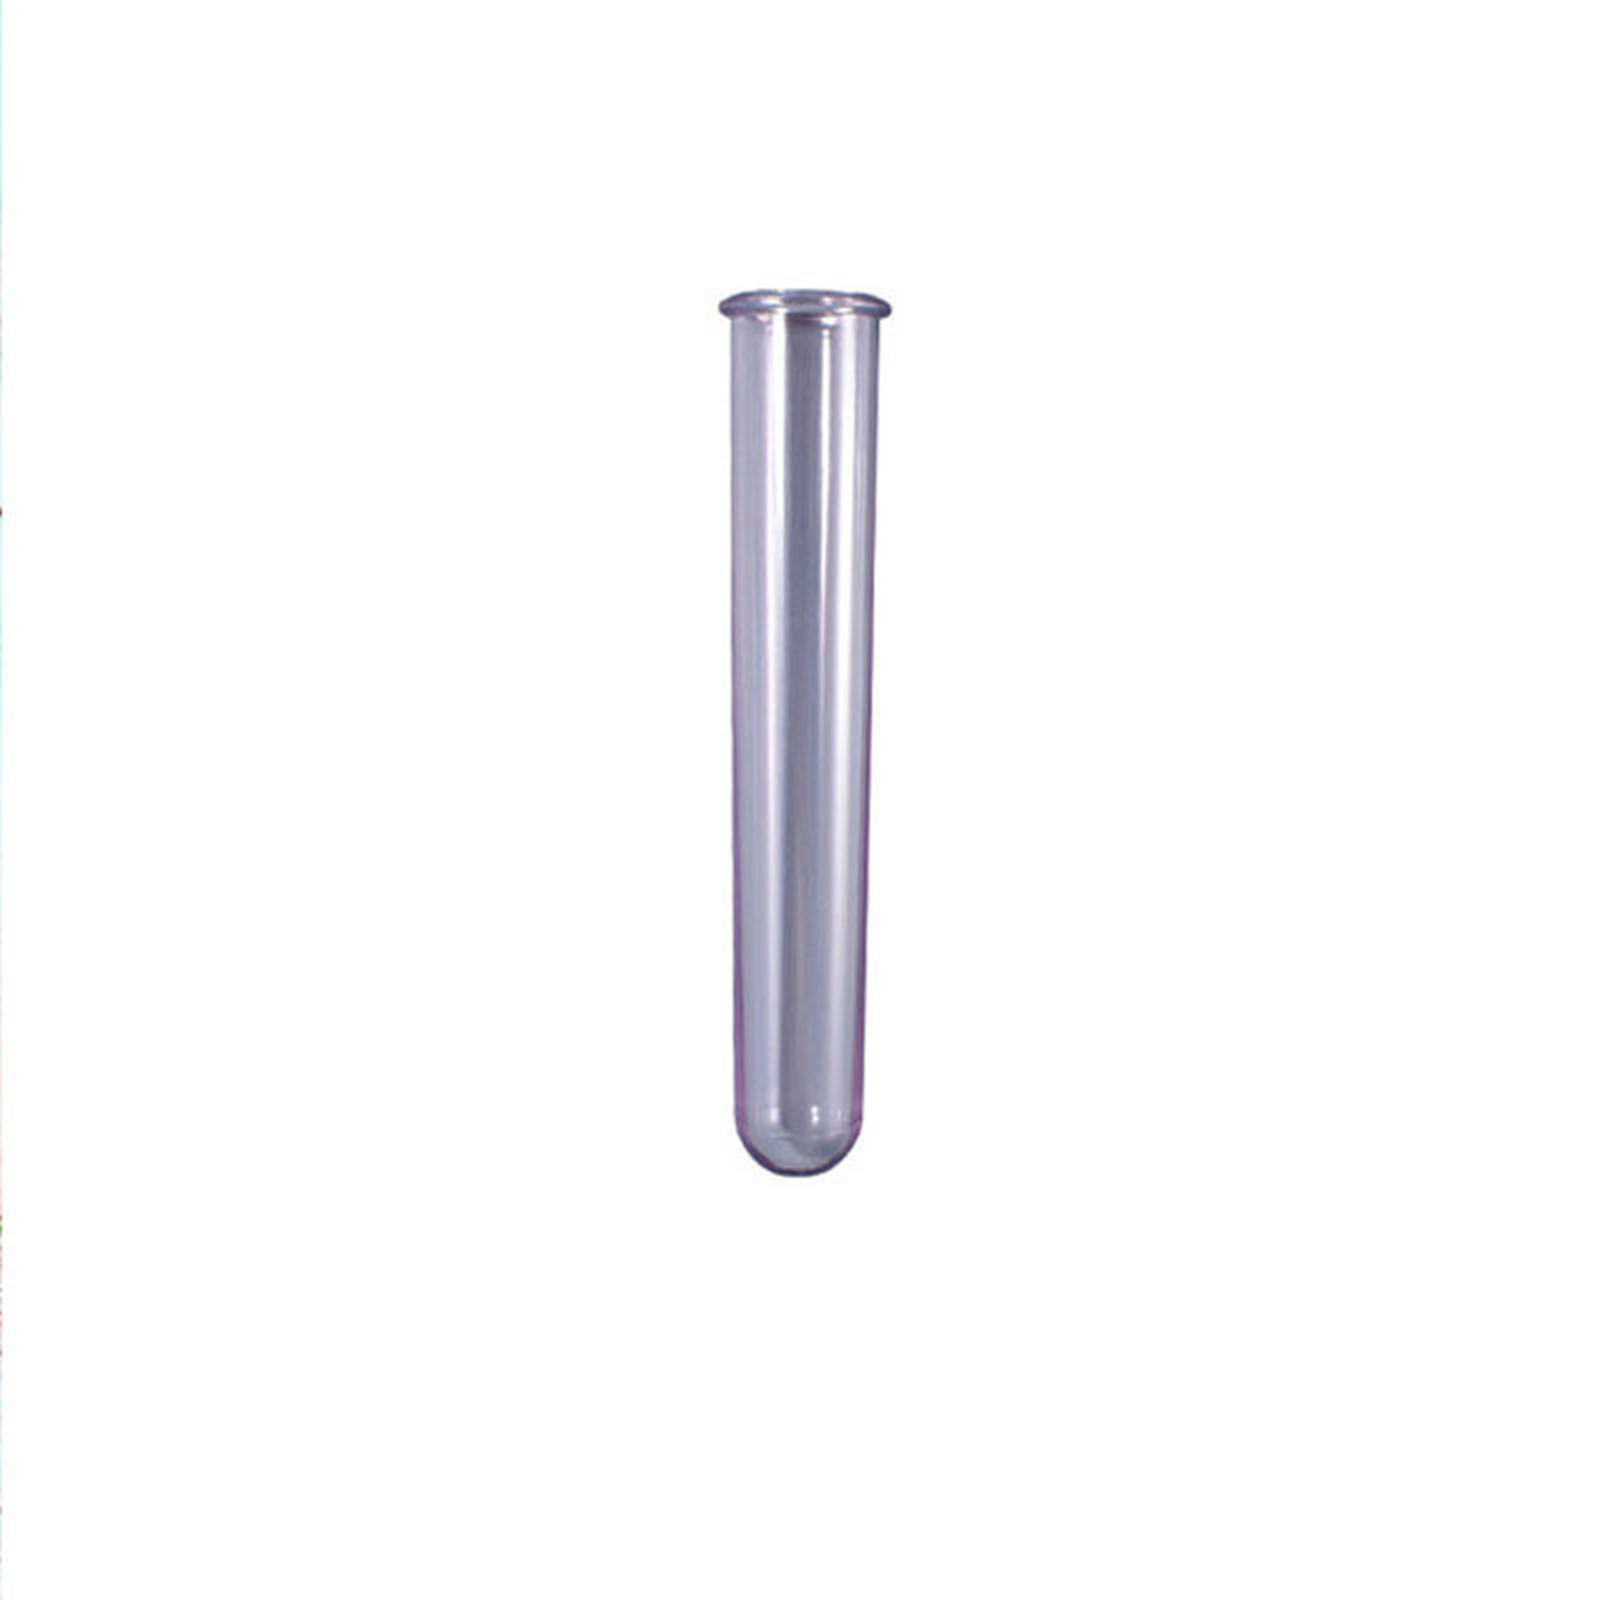 Picture of Silicone Resin Mold For Jewelry Making Test Tube Hydroponic Flower Pot Cylinder Purple 12cm x 1 Piece